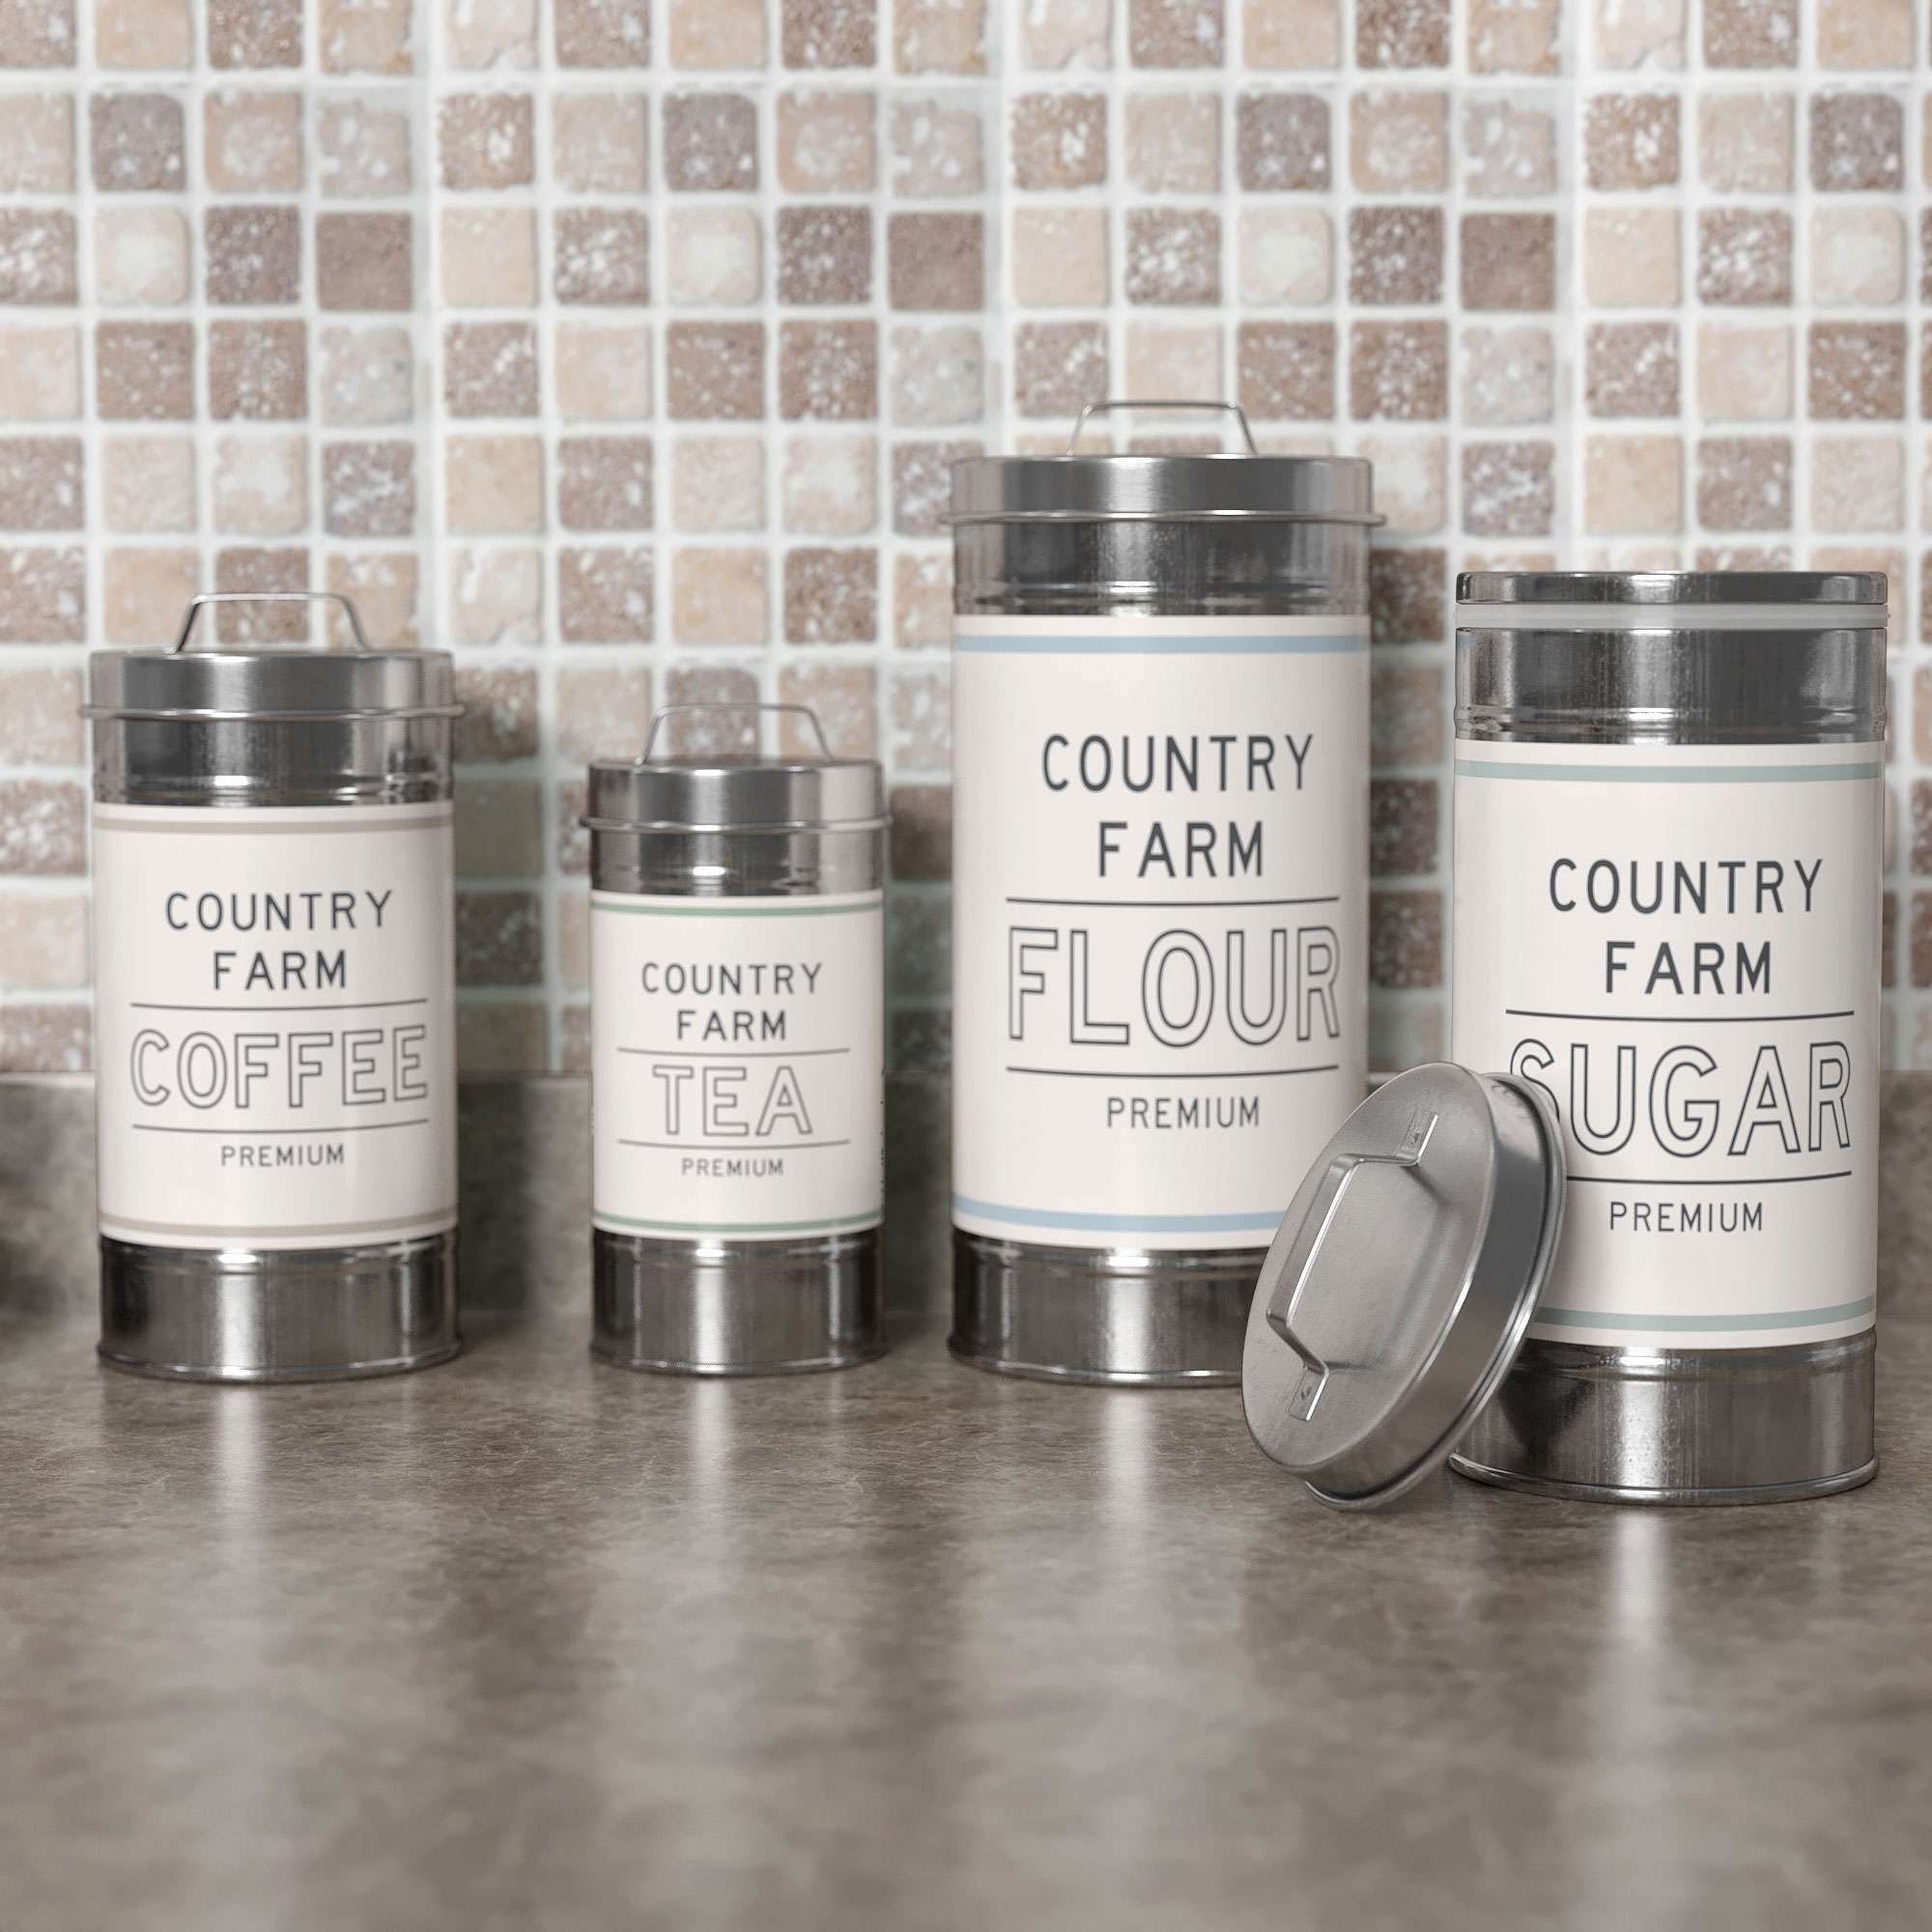 Barnyard Designs Metal Canister Sets for Kitchen Counter Vintage Kitchen Canisters, Country Rustic Farmhouse Decor for the Kitchen, Coffee Tea Sugar Flour Farmhouse Kitchen Decor, Set of 4 - image 2 of 6